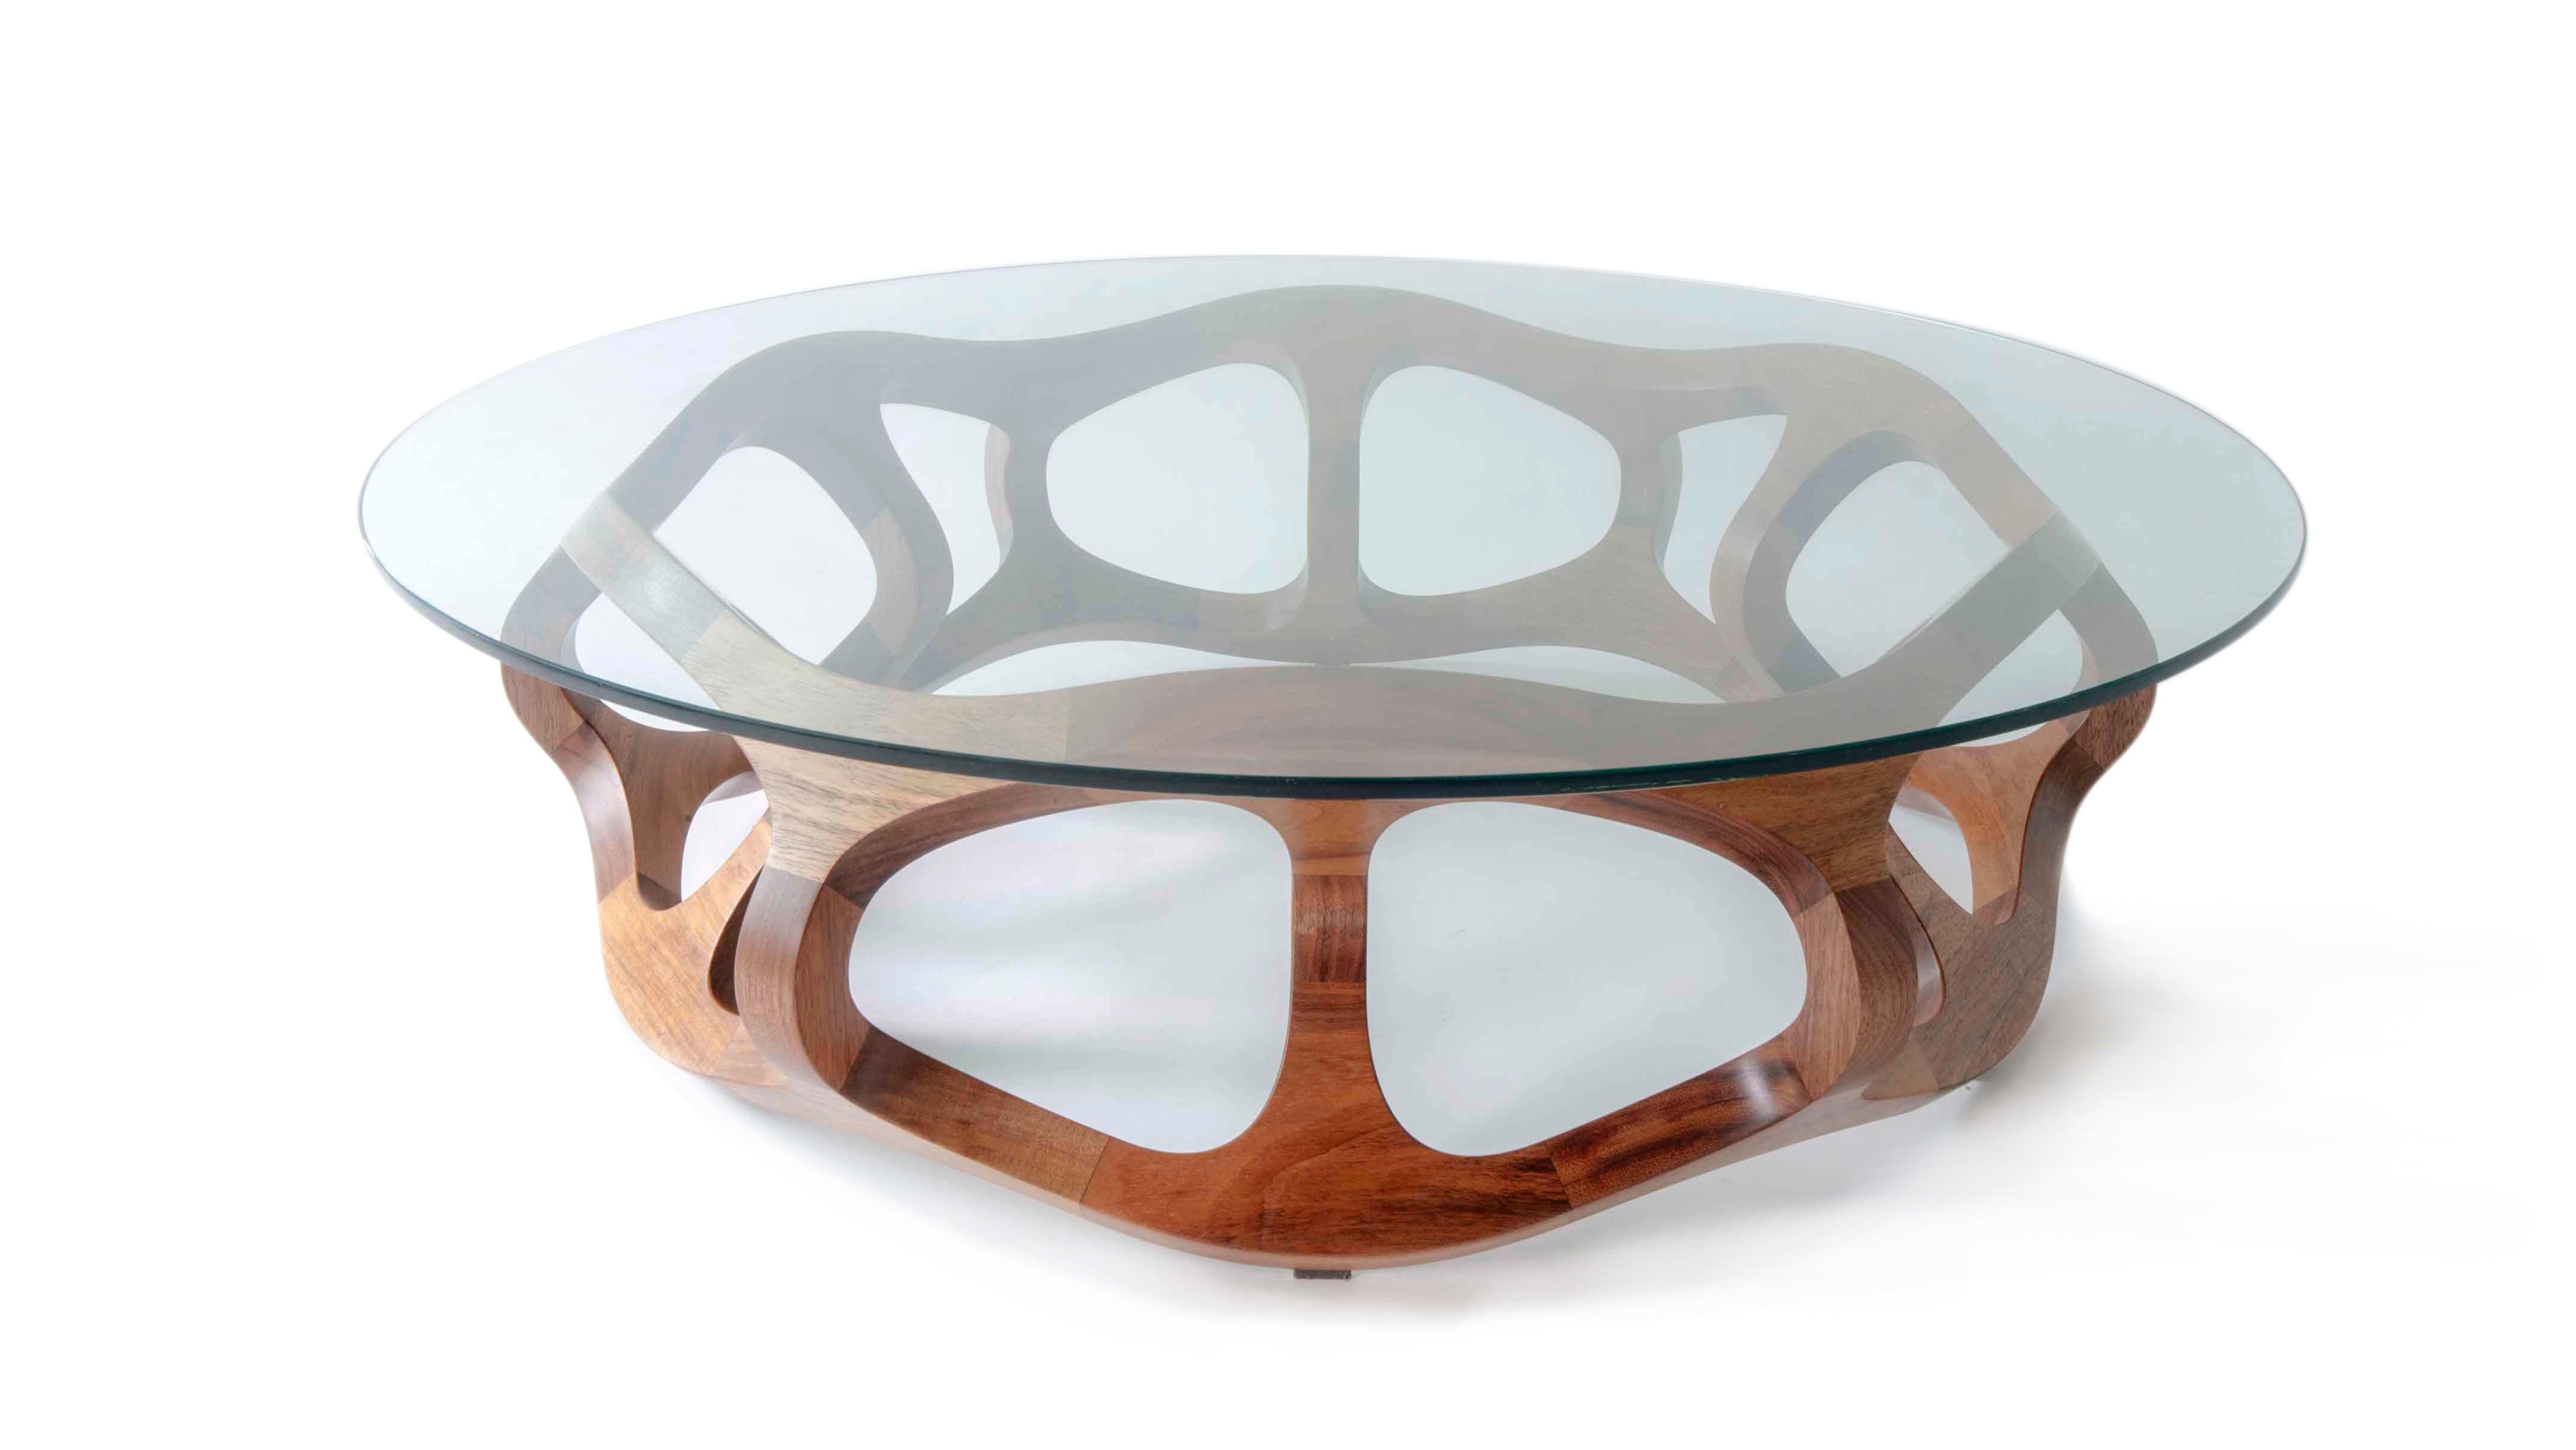 This contemporary sculptural coffee table is created by renowned Mexican Industrial designer Pedro Cerisola, whose work is in the permanent collection of the National Autonomous University Science Museum and has been exhibited in the Franz Mayer